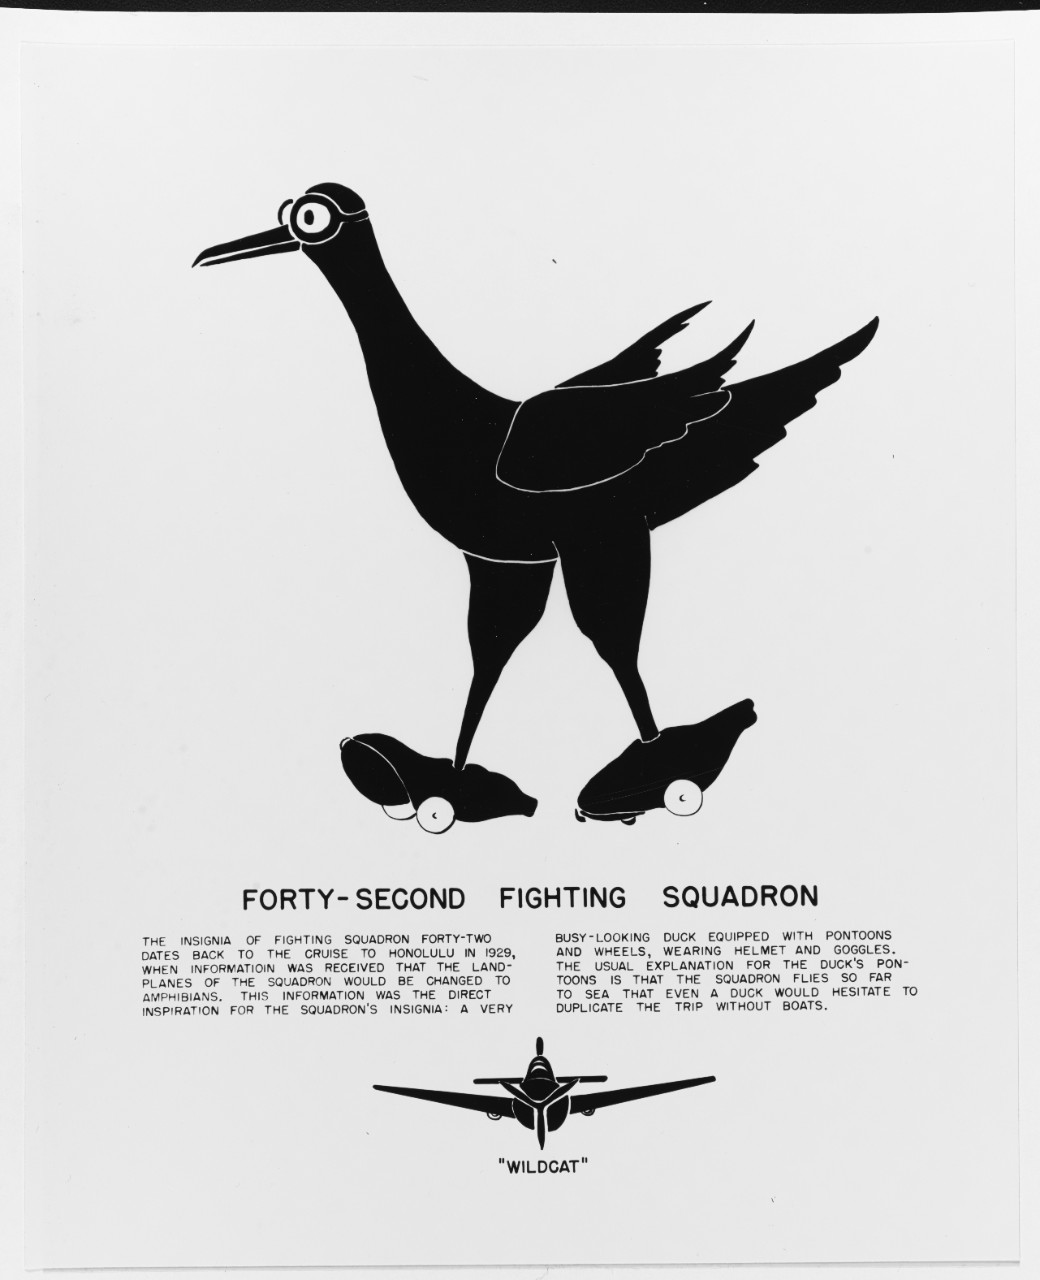 Photo #: NH 82618 Insignia: Fighting Squadron Forty-Two (VF-42)